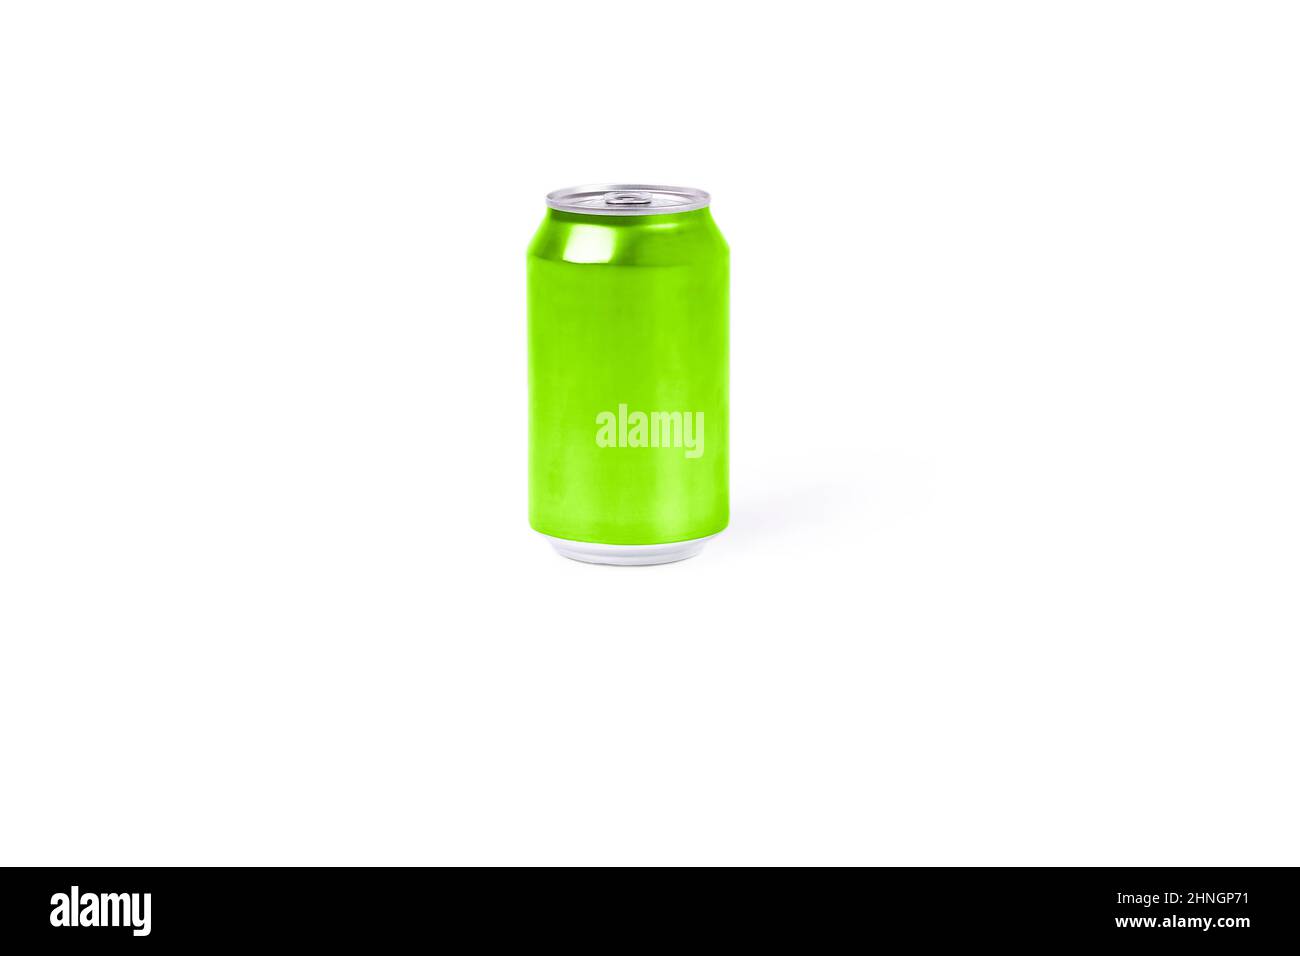 Lime-colored aluminum can on a white background. Refreshing drink concept Stock Photo